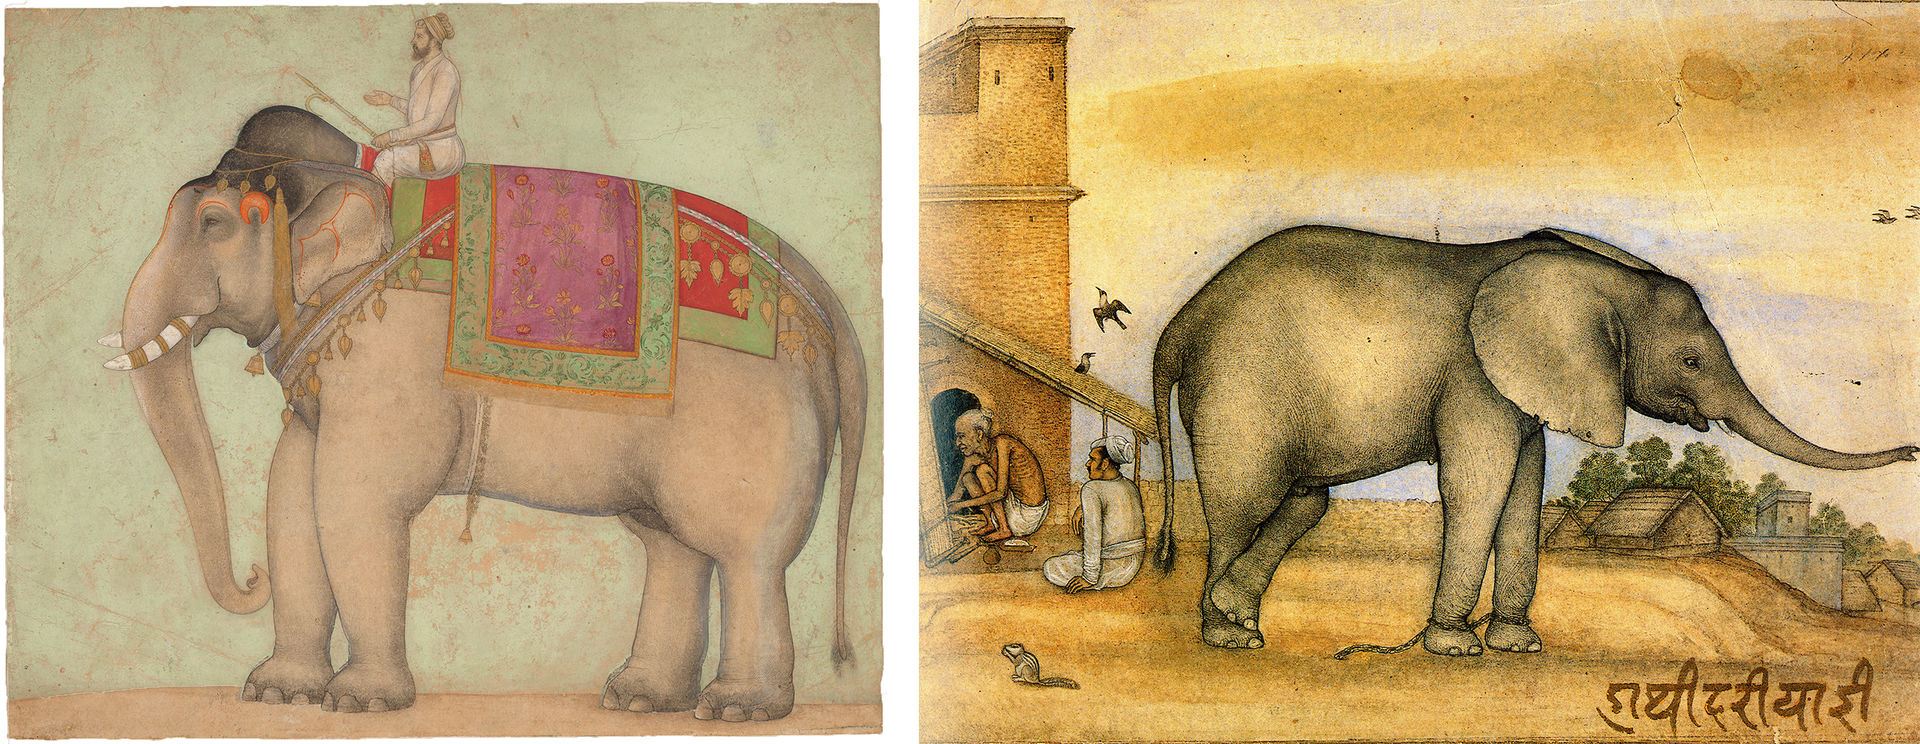 painting of an elephant with a rider on the left and painting of an elephant on the right